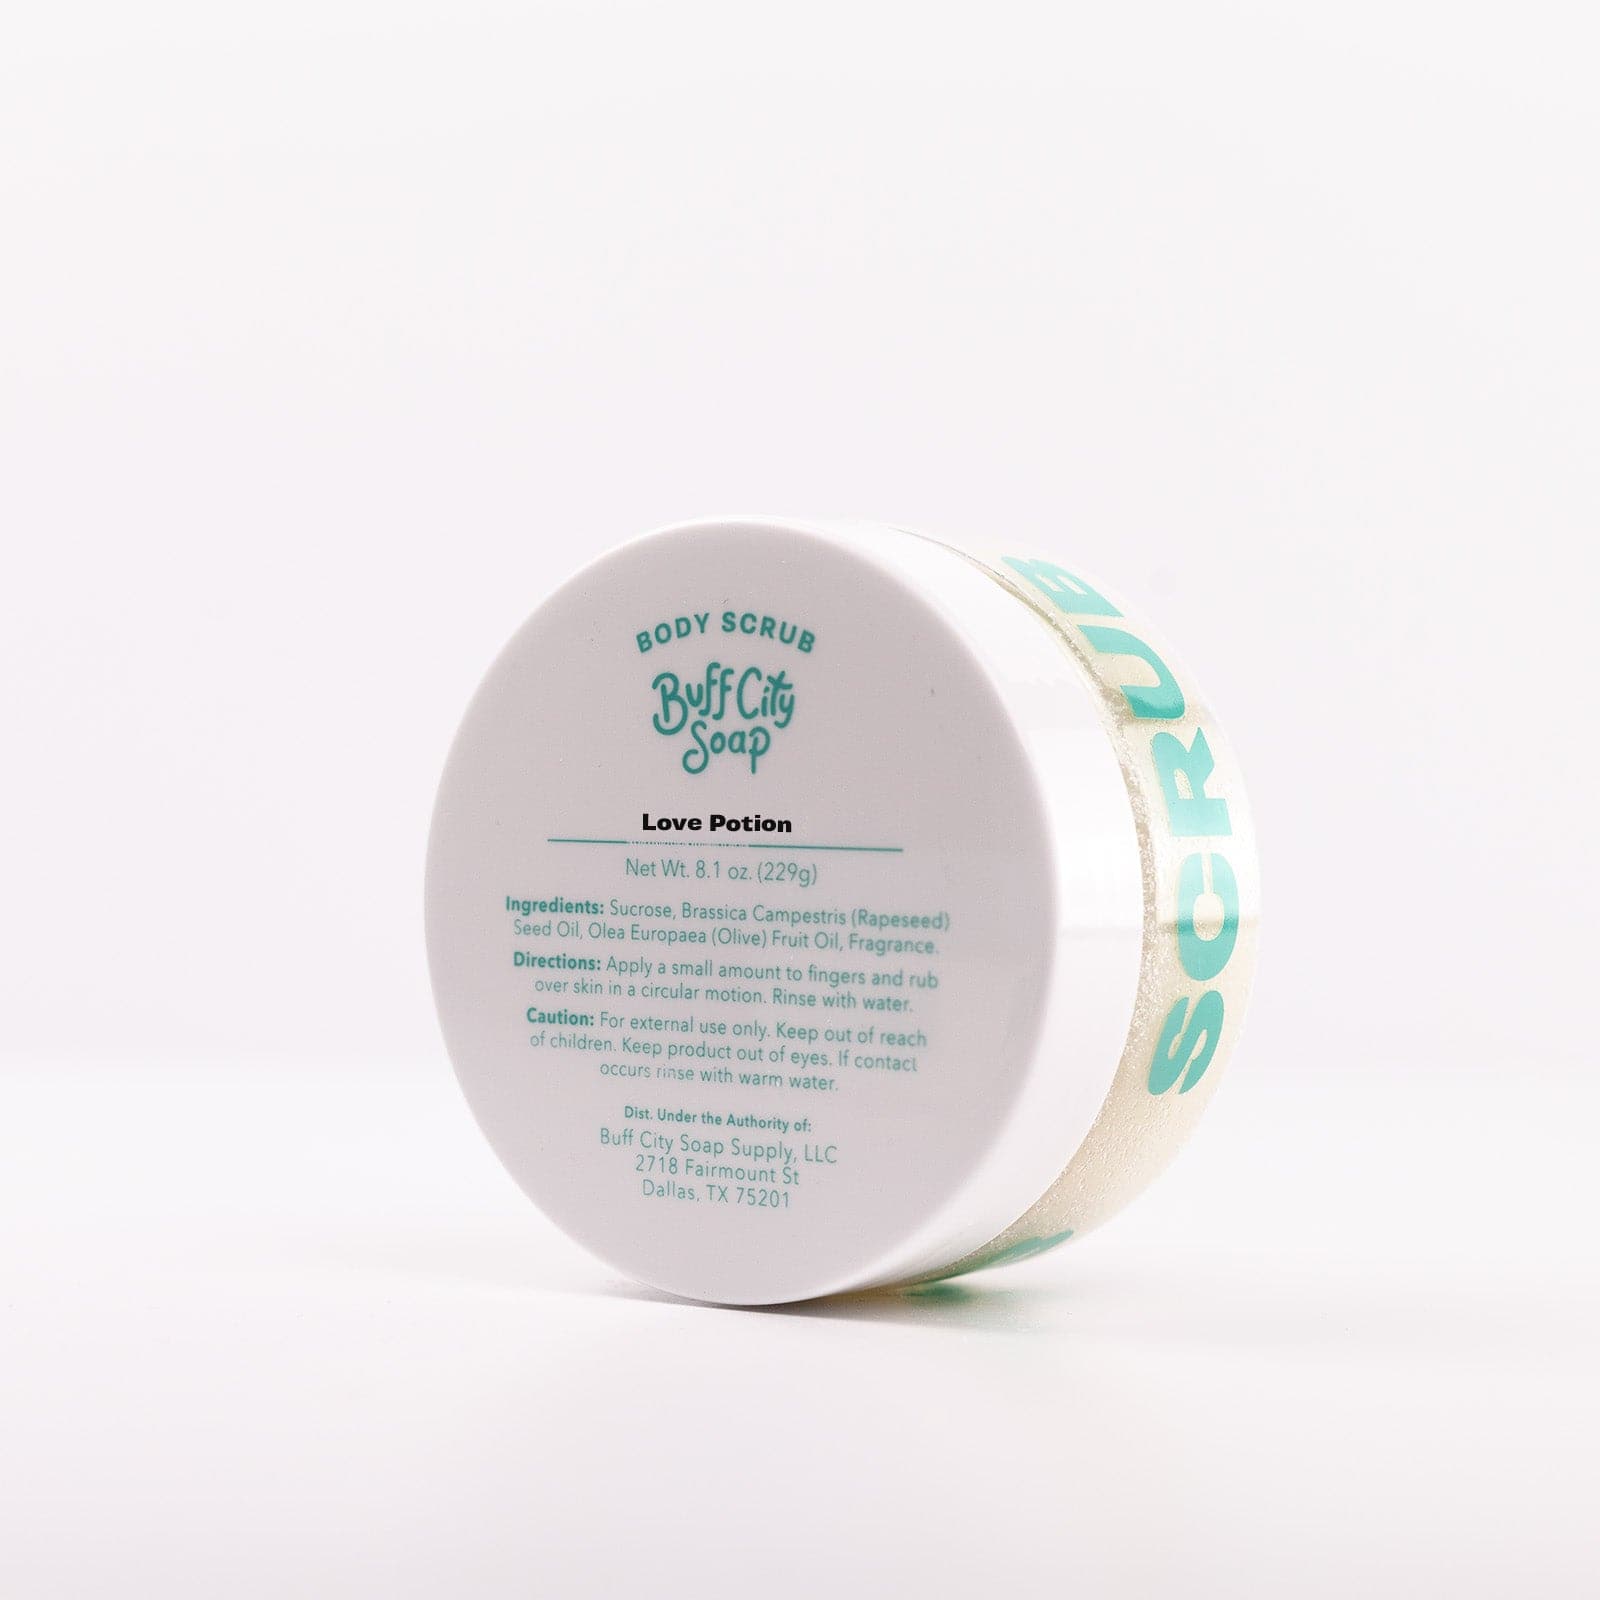 Love Potion Body Scrub angled in container against white background 